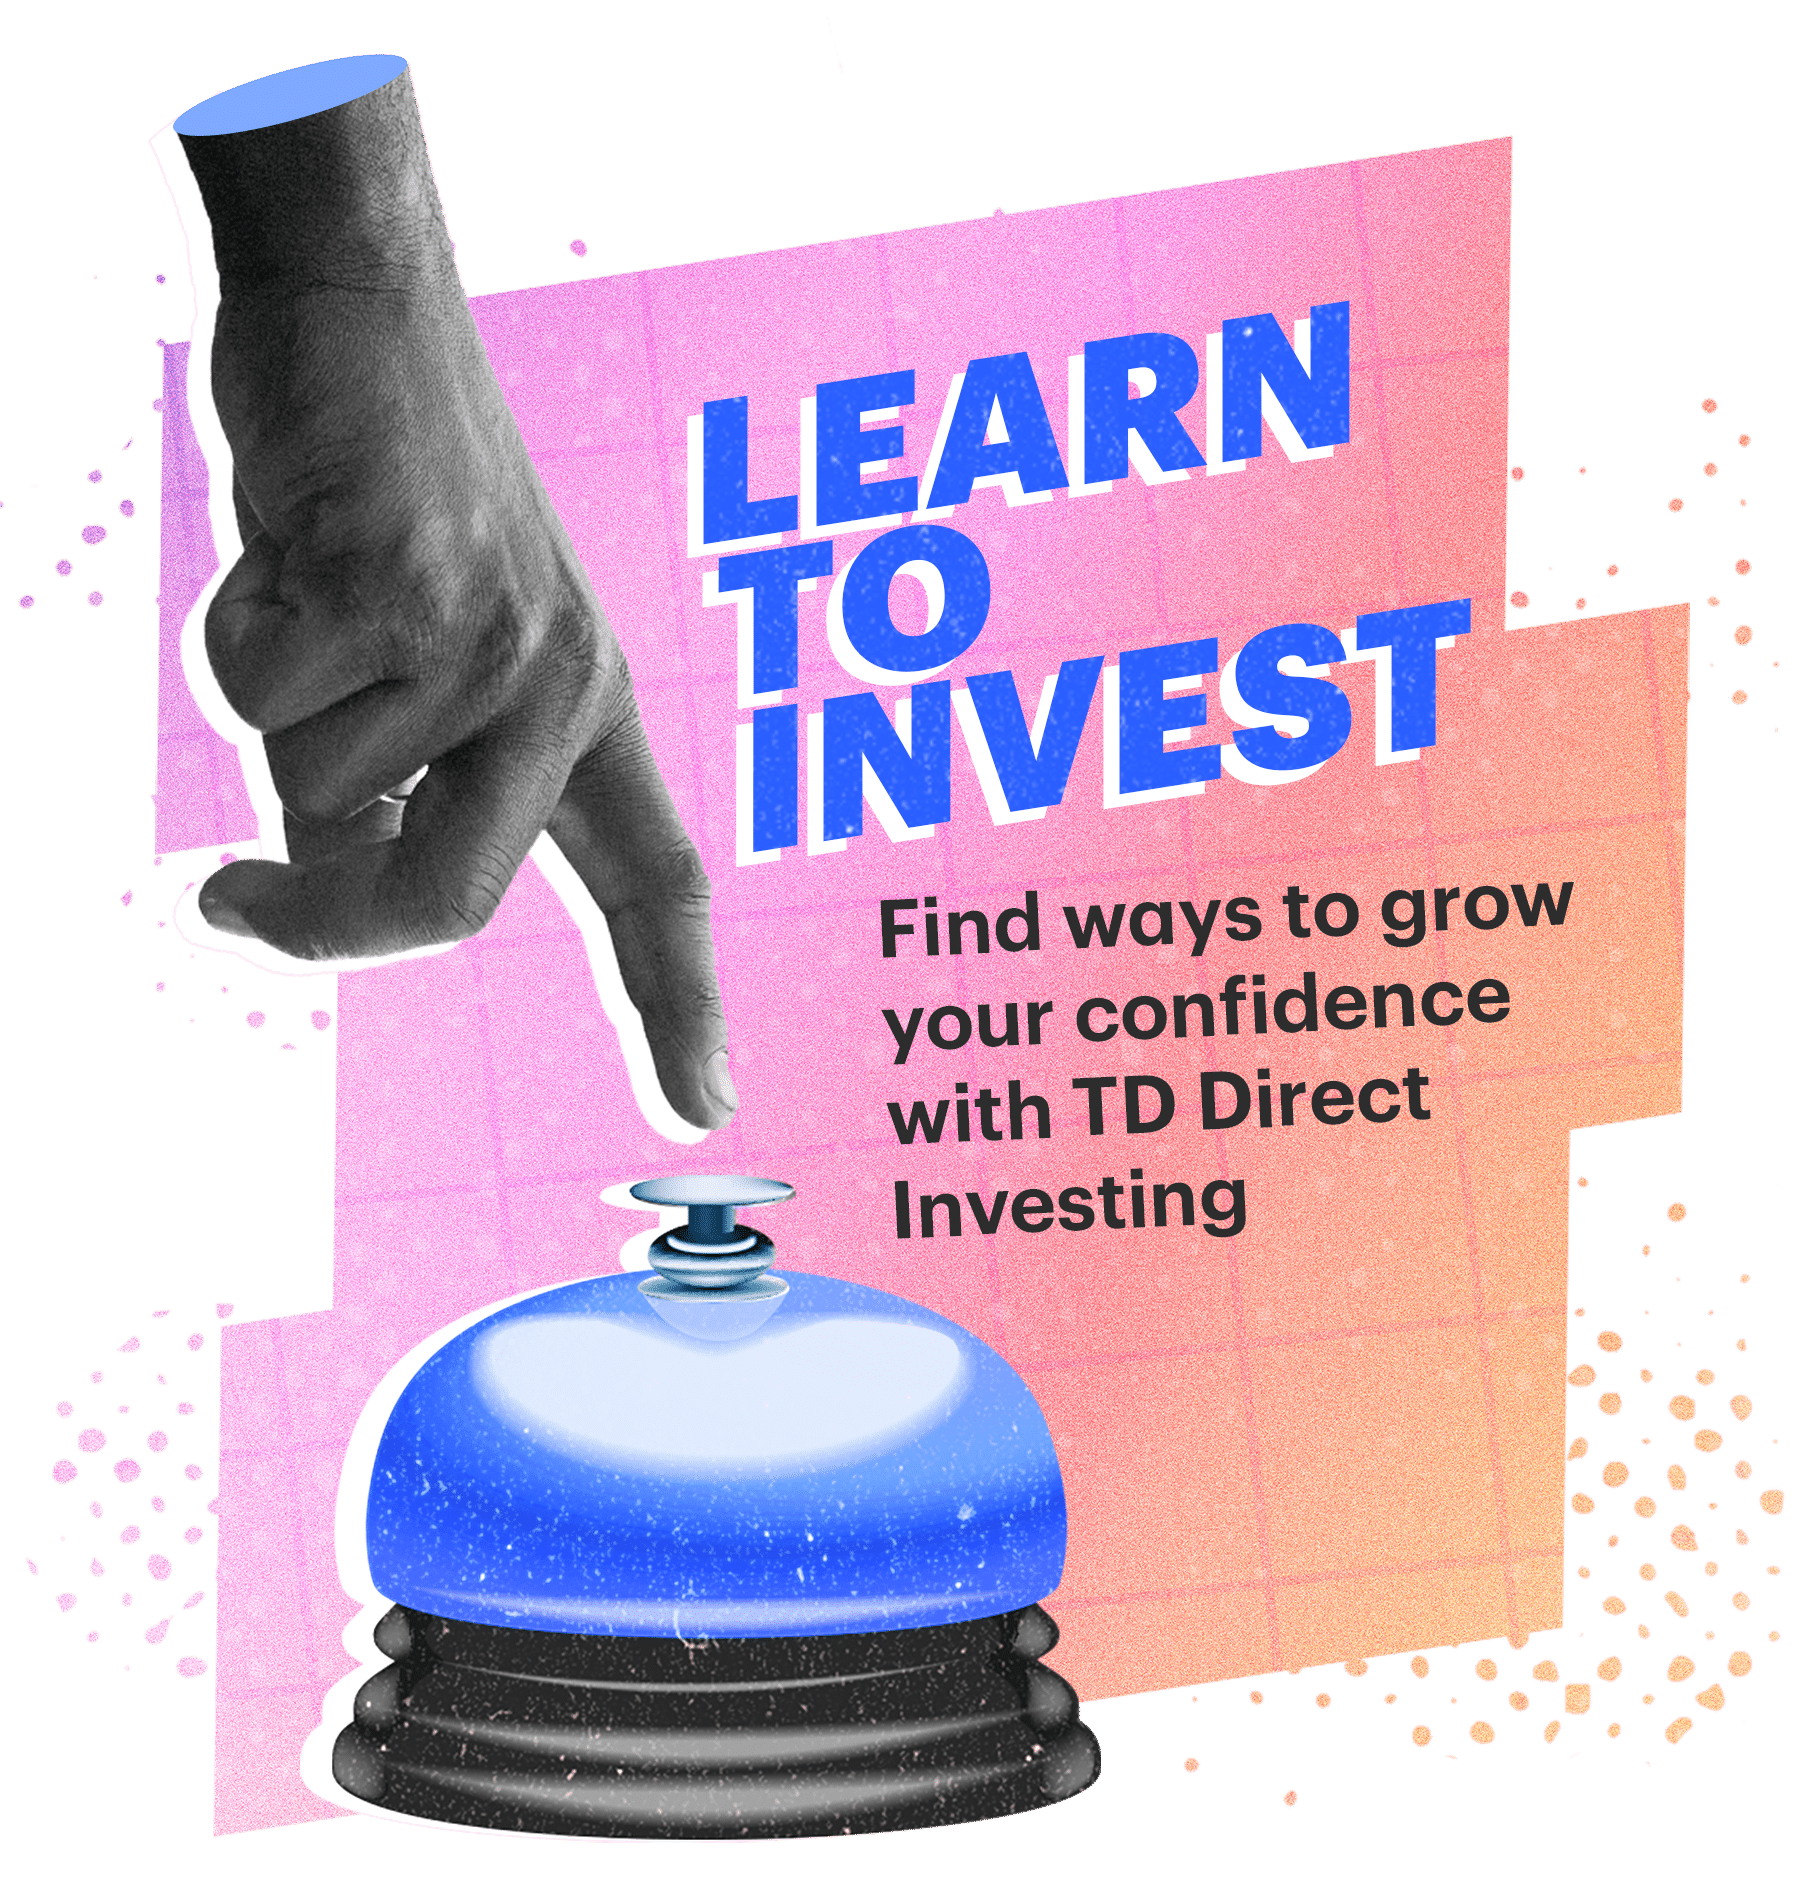 Learn to Invest. Find ways to grow your confidence with TD Direct Investing